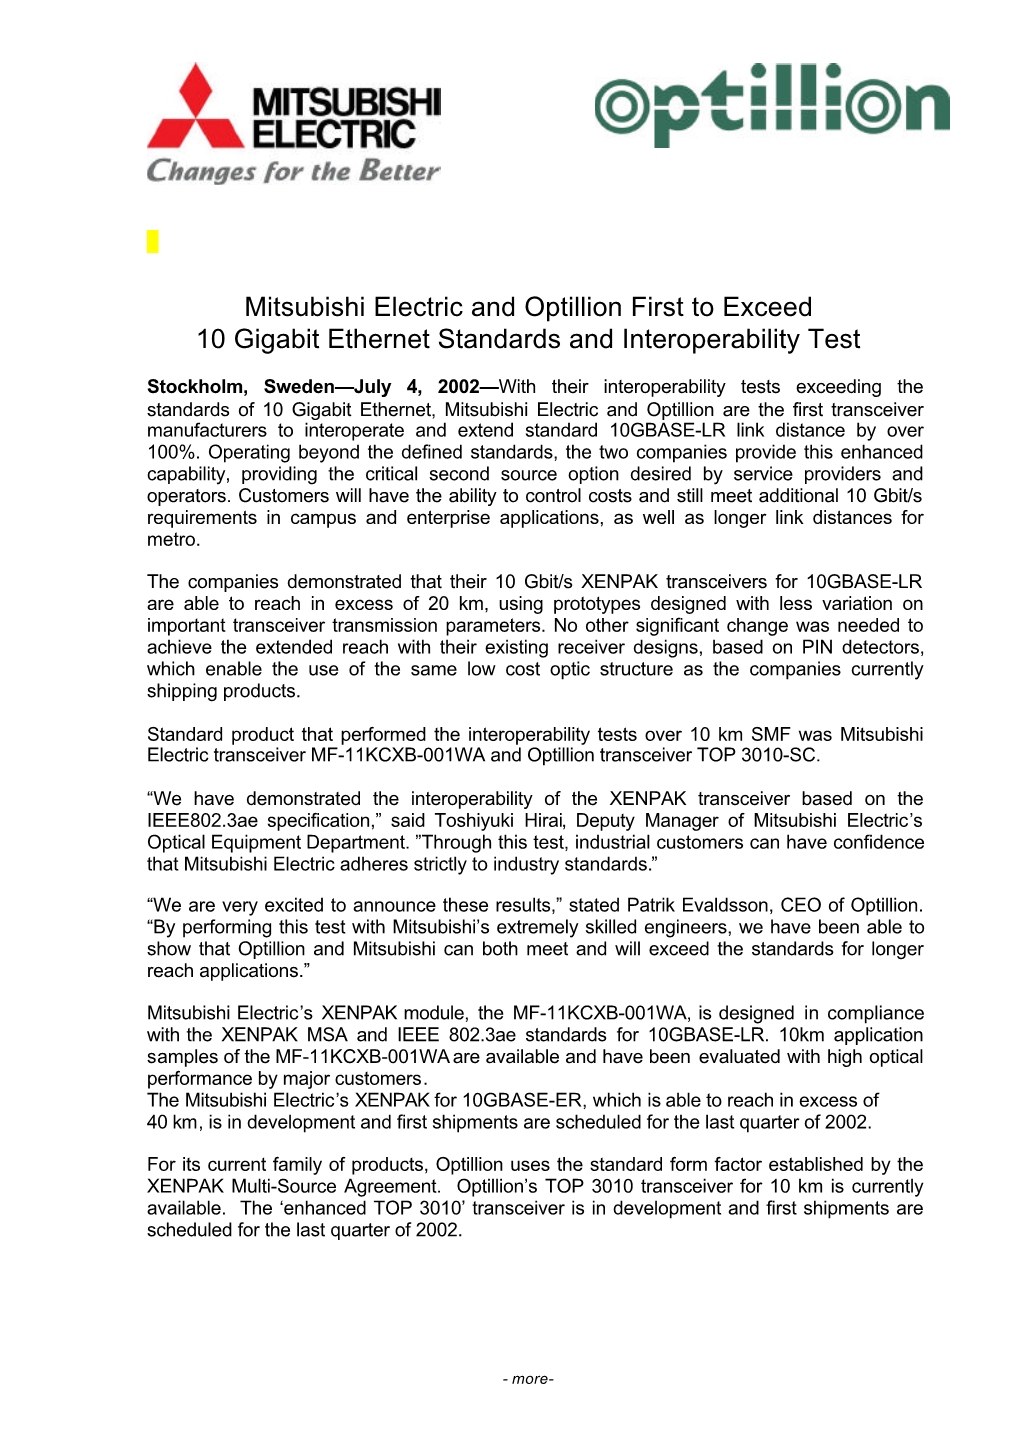 Mitsubishi Electric and Optillion First to Exceed 10 Gigabit Ethernet Standards and Interoperability Test